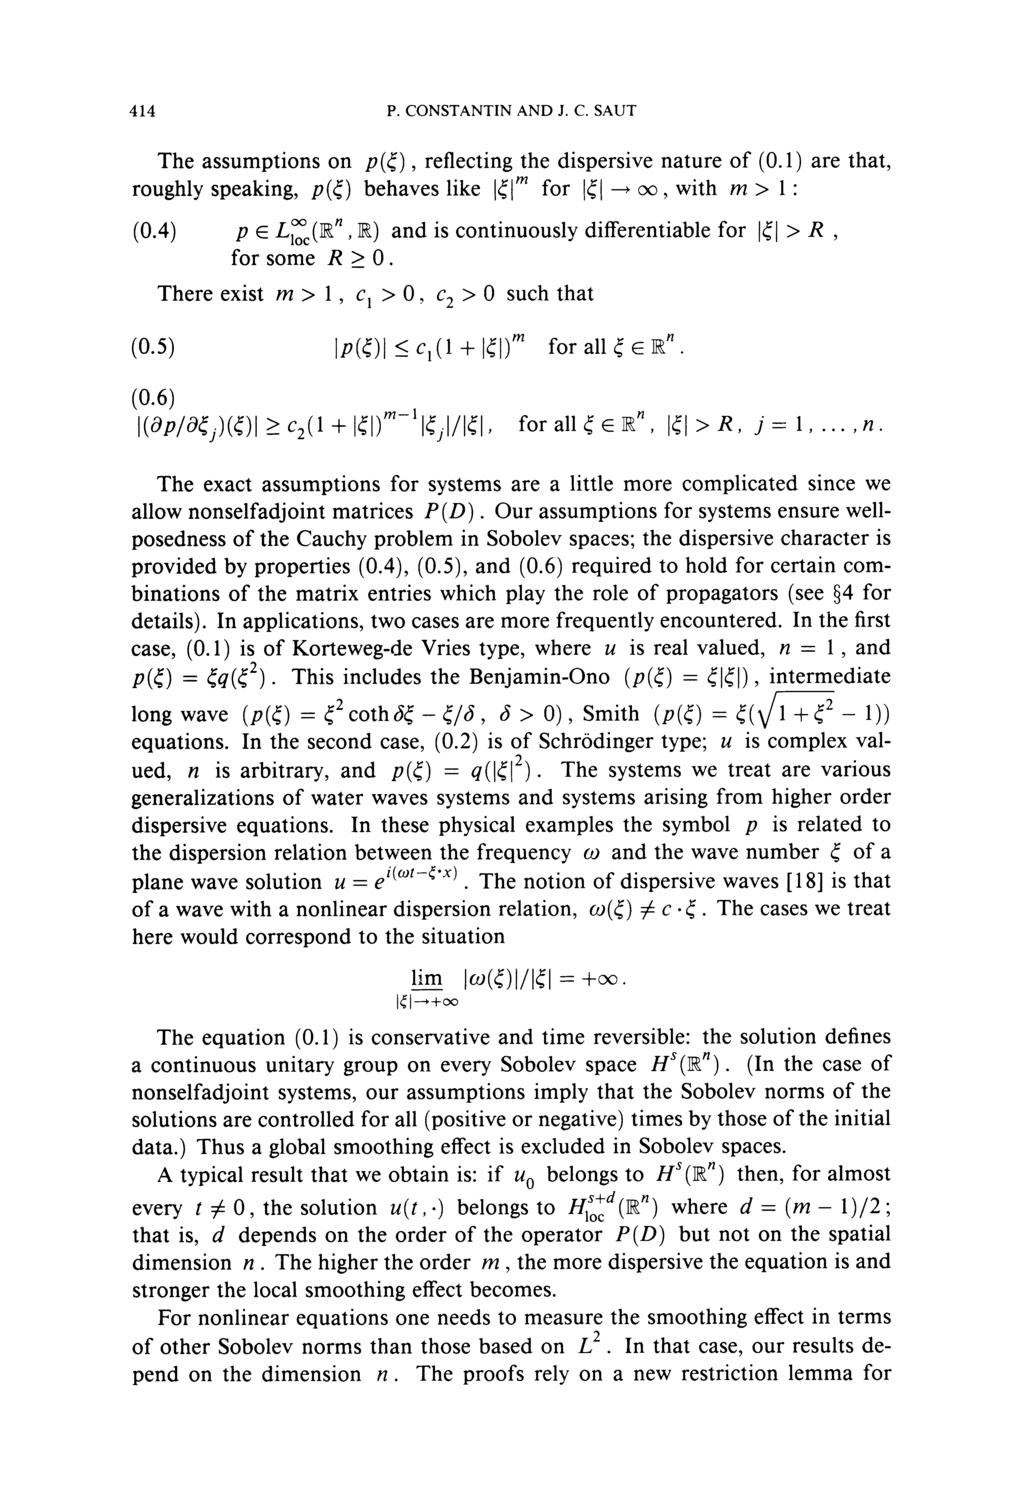 414 P. CONSTANTIN AND J. C. SAUT The assumptions on p ( ), reflecting the dispersive nature of (0.1) are that, roughly speaking, p( ) behaves like 1 l m for I I -t 00, with m > 1 : (0.